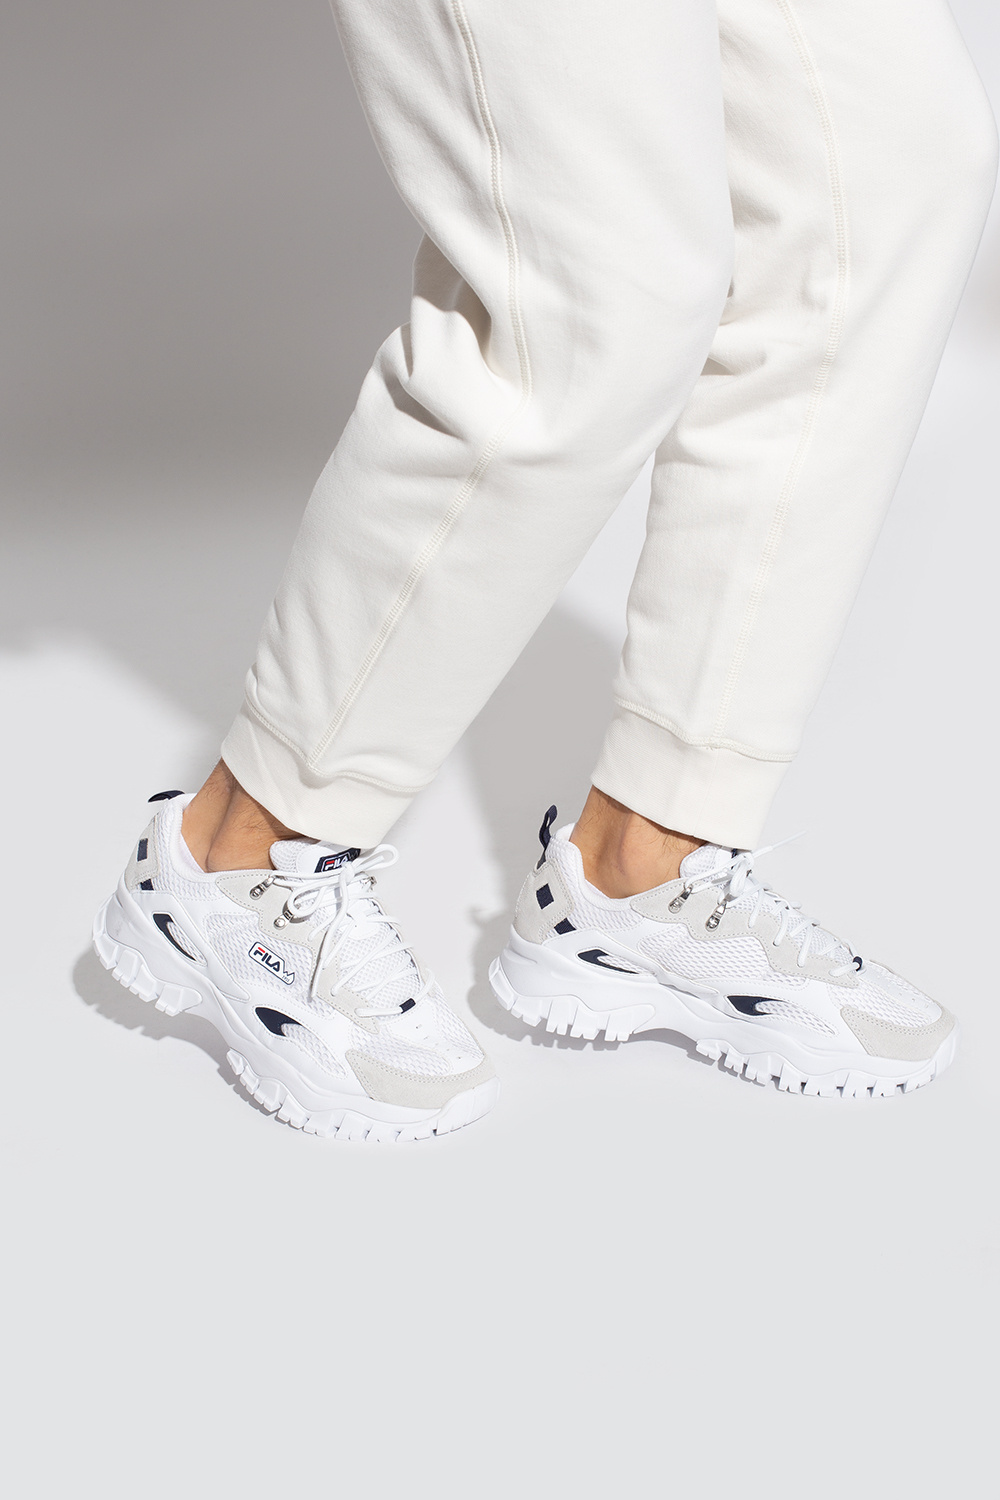 Fila ‘Ray Tracer TR2’ sneakers